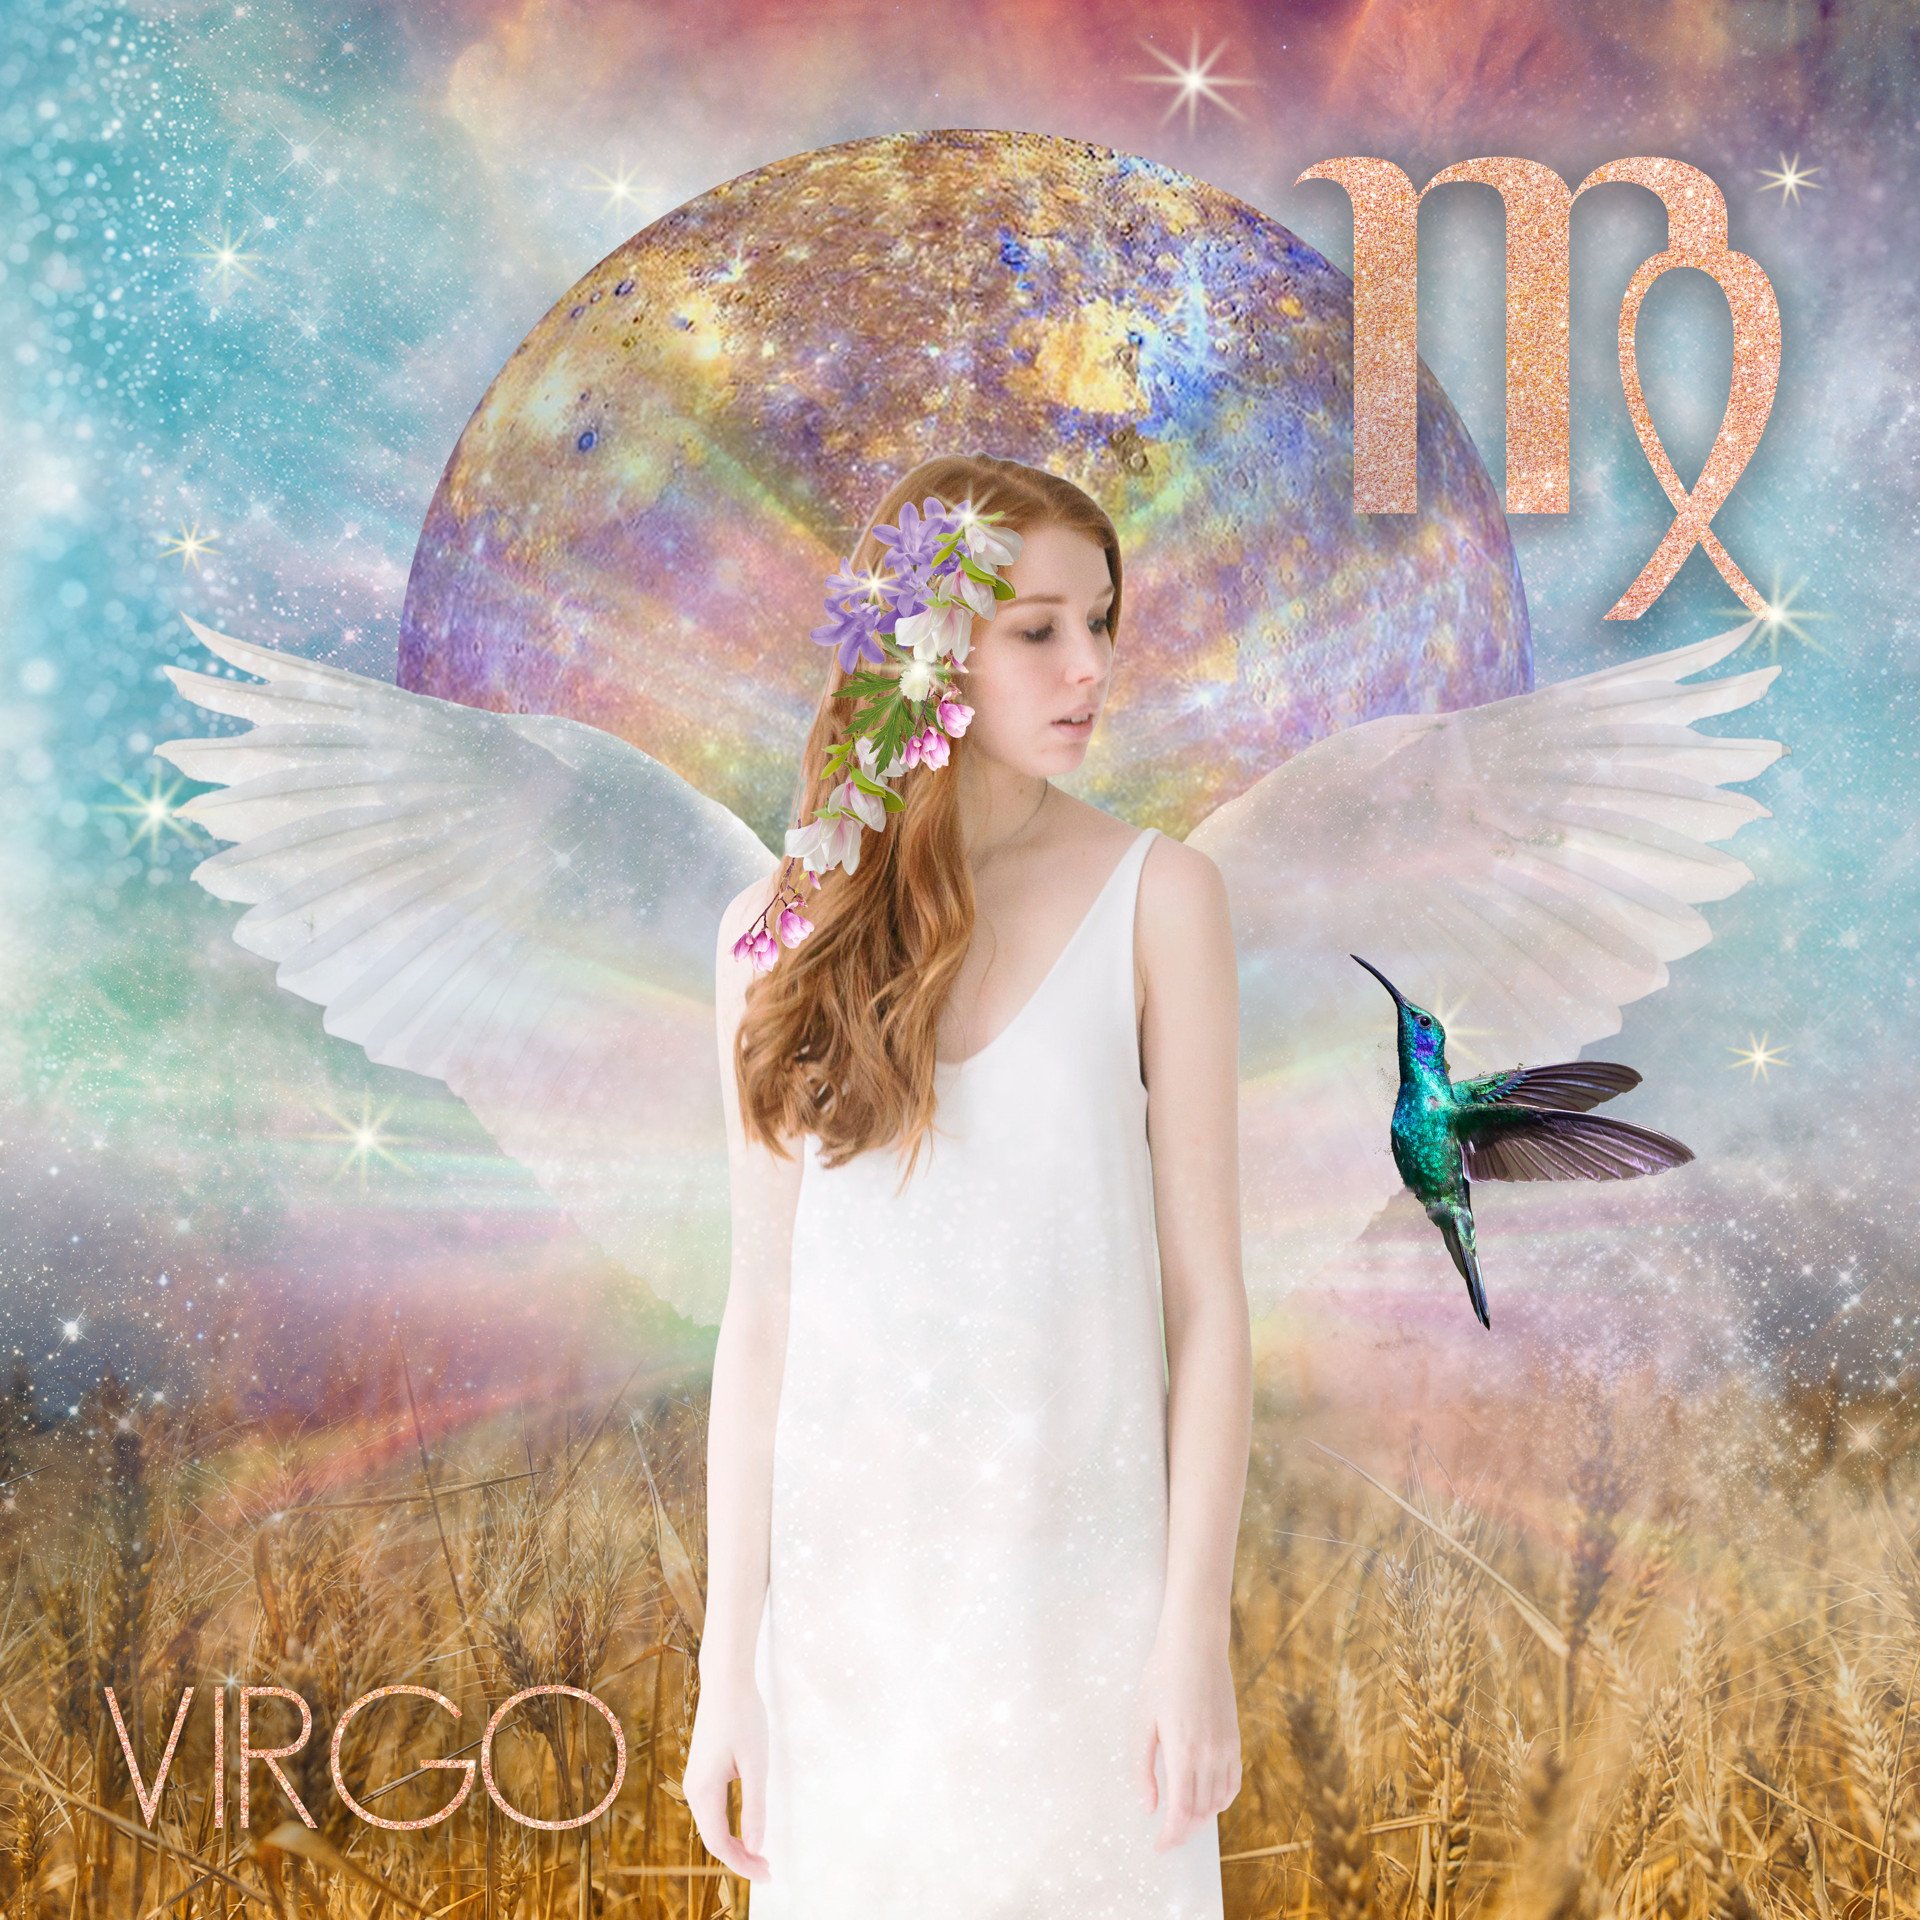 Virgo - Your Guide to the Helpful Healer of the Zodiac | AstrologyTV